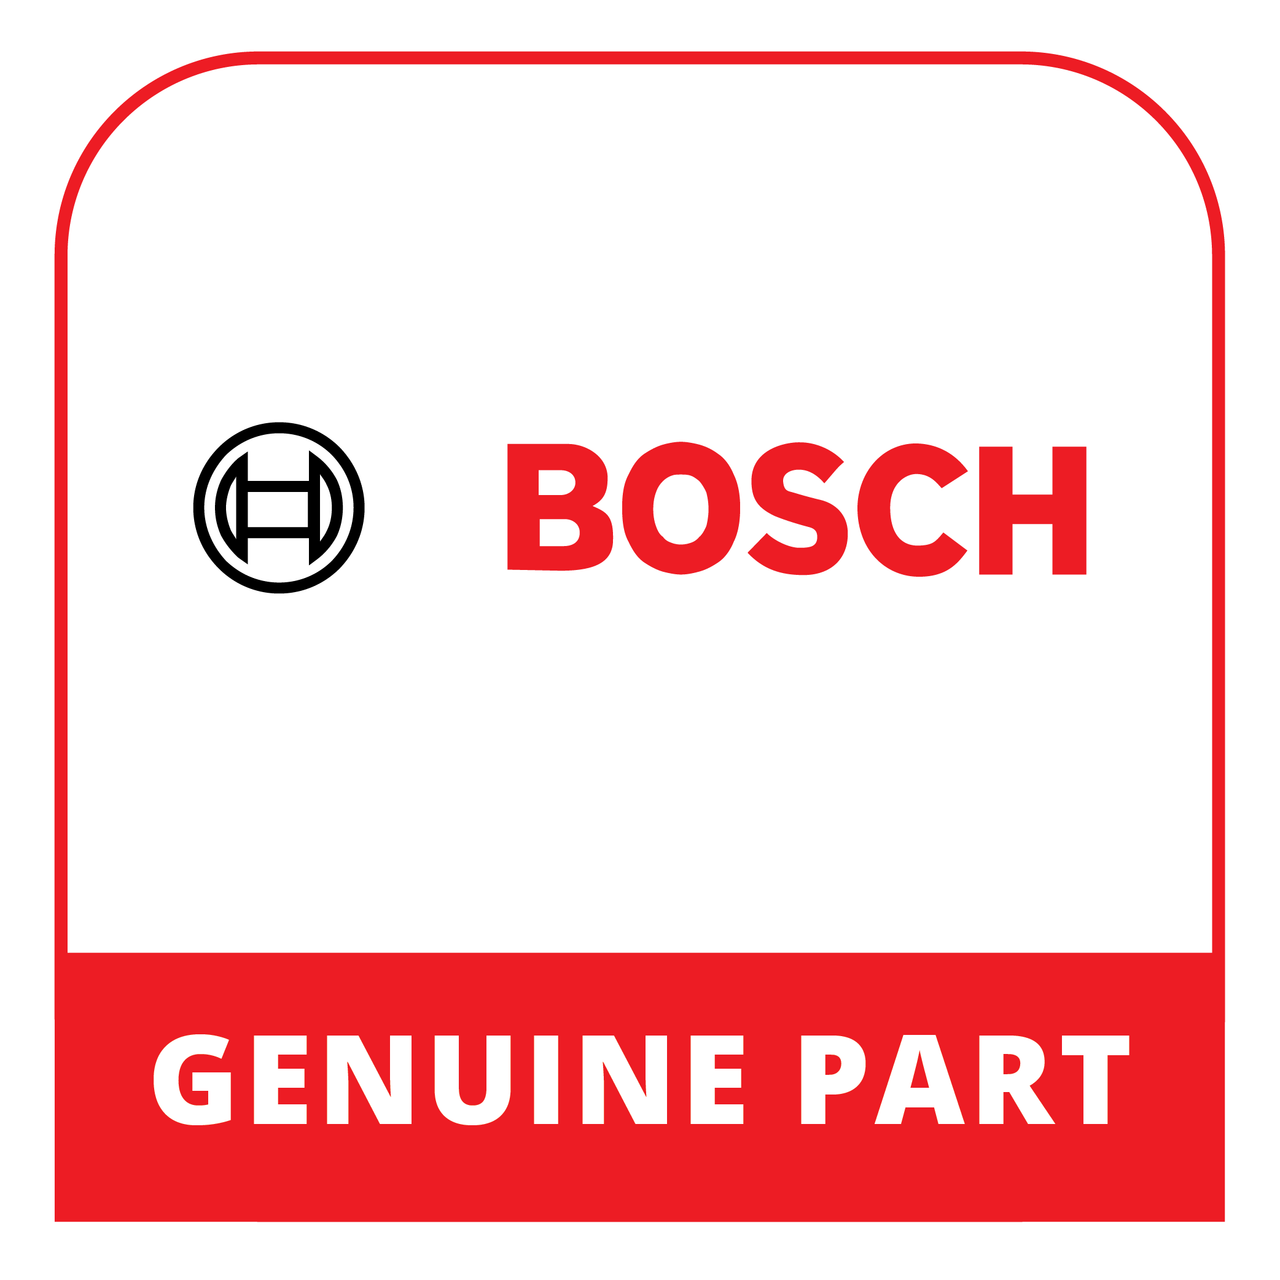 Bosch 18015626 - Template - Genuine Bosch (Thermador) Part